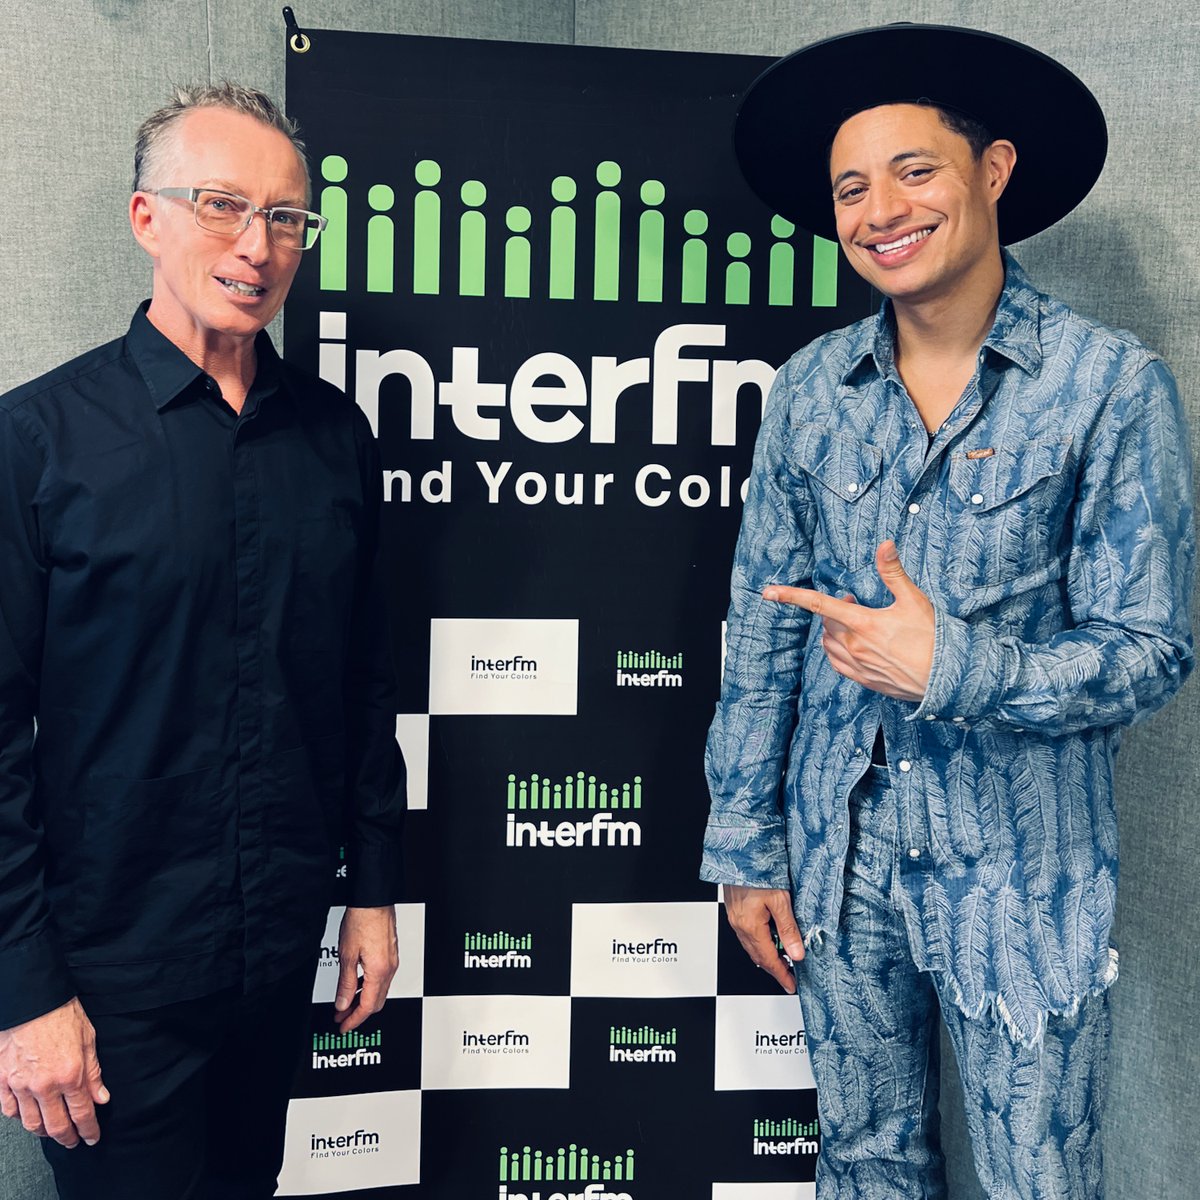 A conversation with @josejamesmusic 'jazz artist for the hip-hop generation' about his new album [1978], inspired by his birth year and all the amazing music of the era and his creative journey. Listen now on #guyperryman Interviews podcast: guyperrymaninterviews.buzzsprout.com